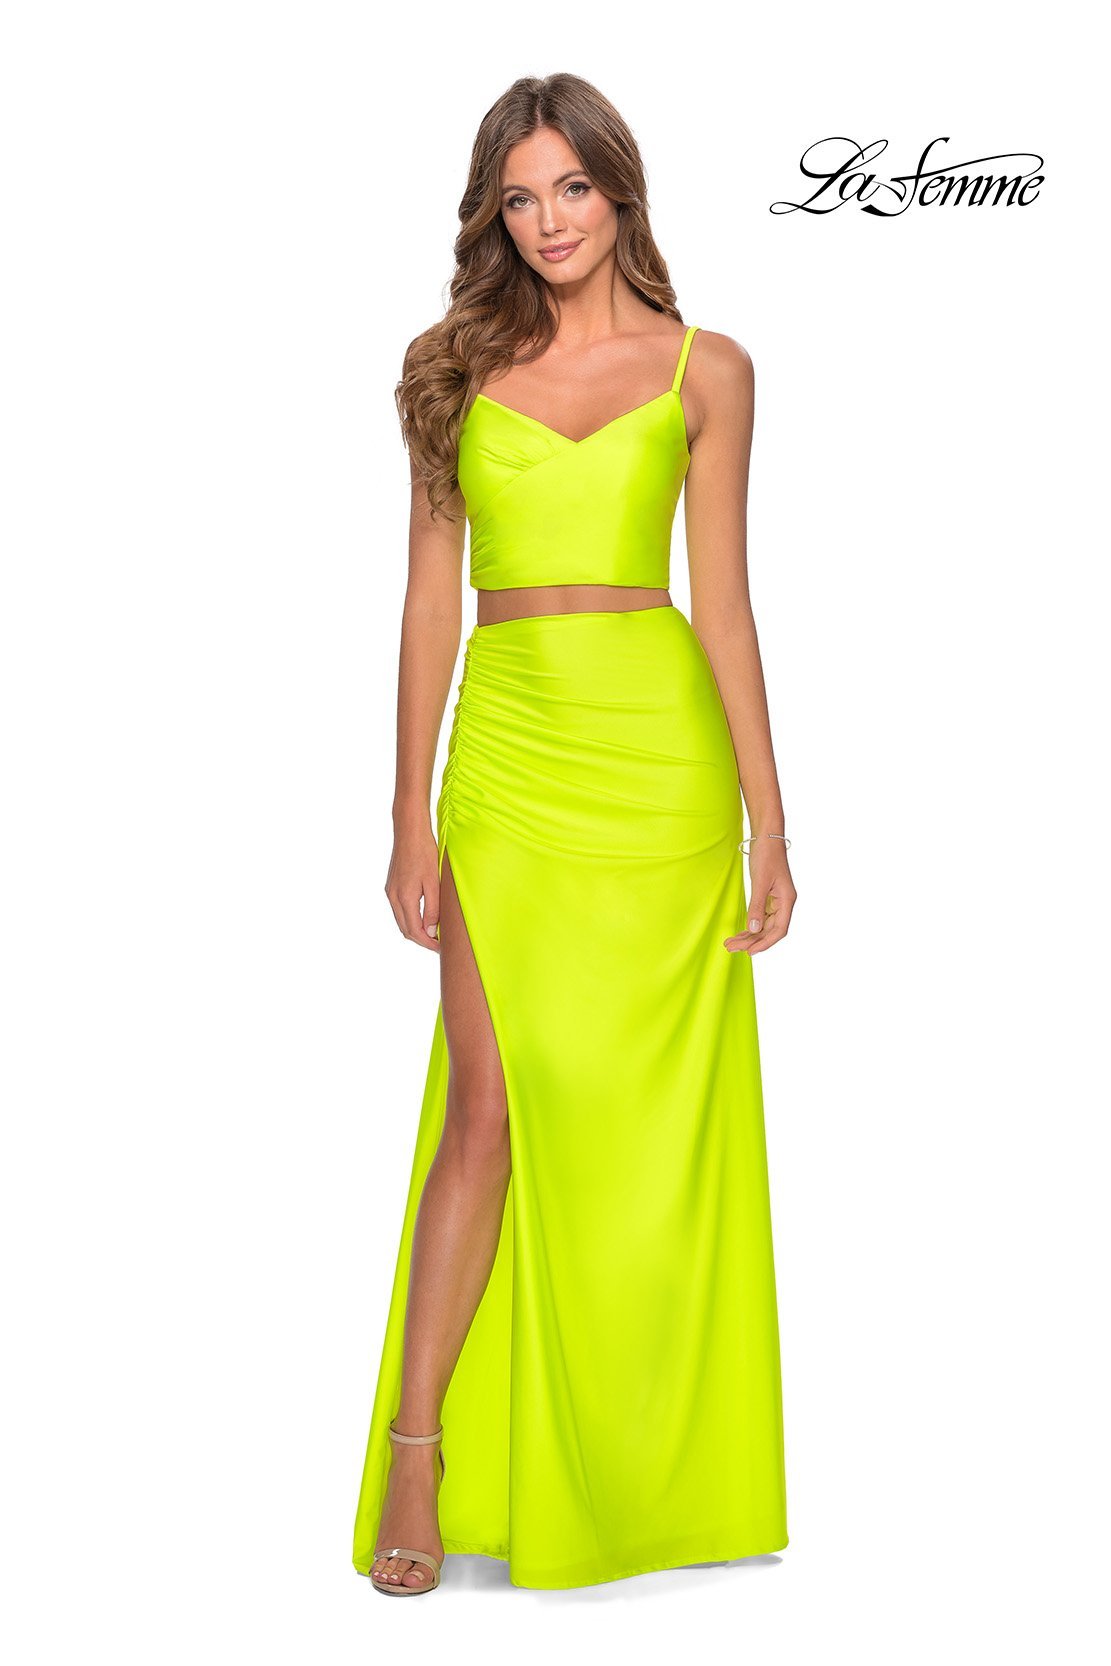 La Femme 28472 dress images in these colors: Neon Green, Neon Pink, Neon Yellow, Royal Blue.